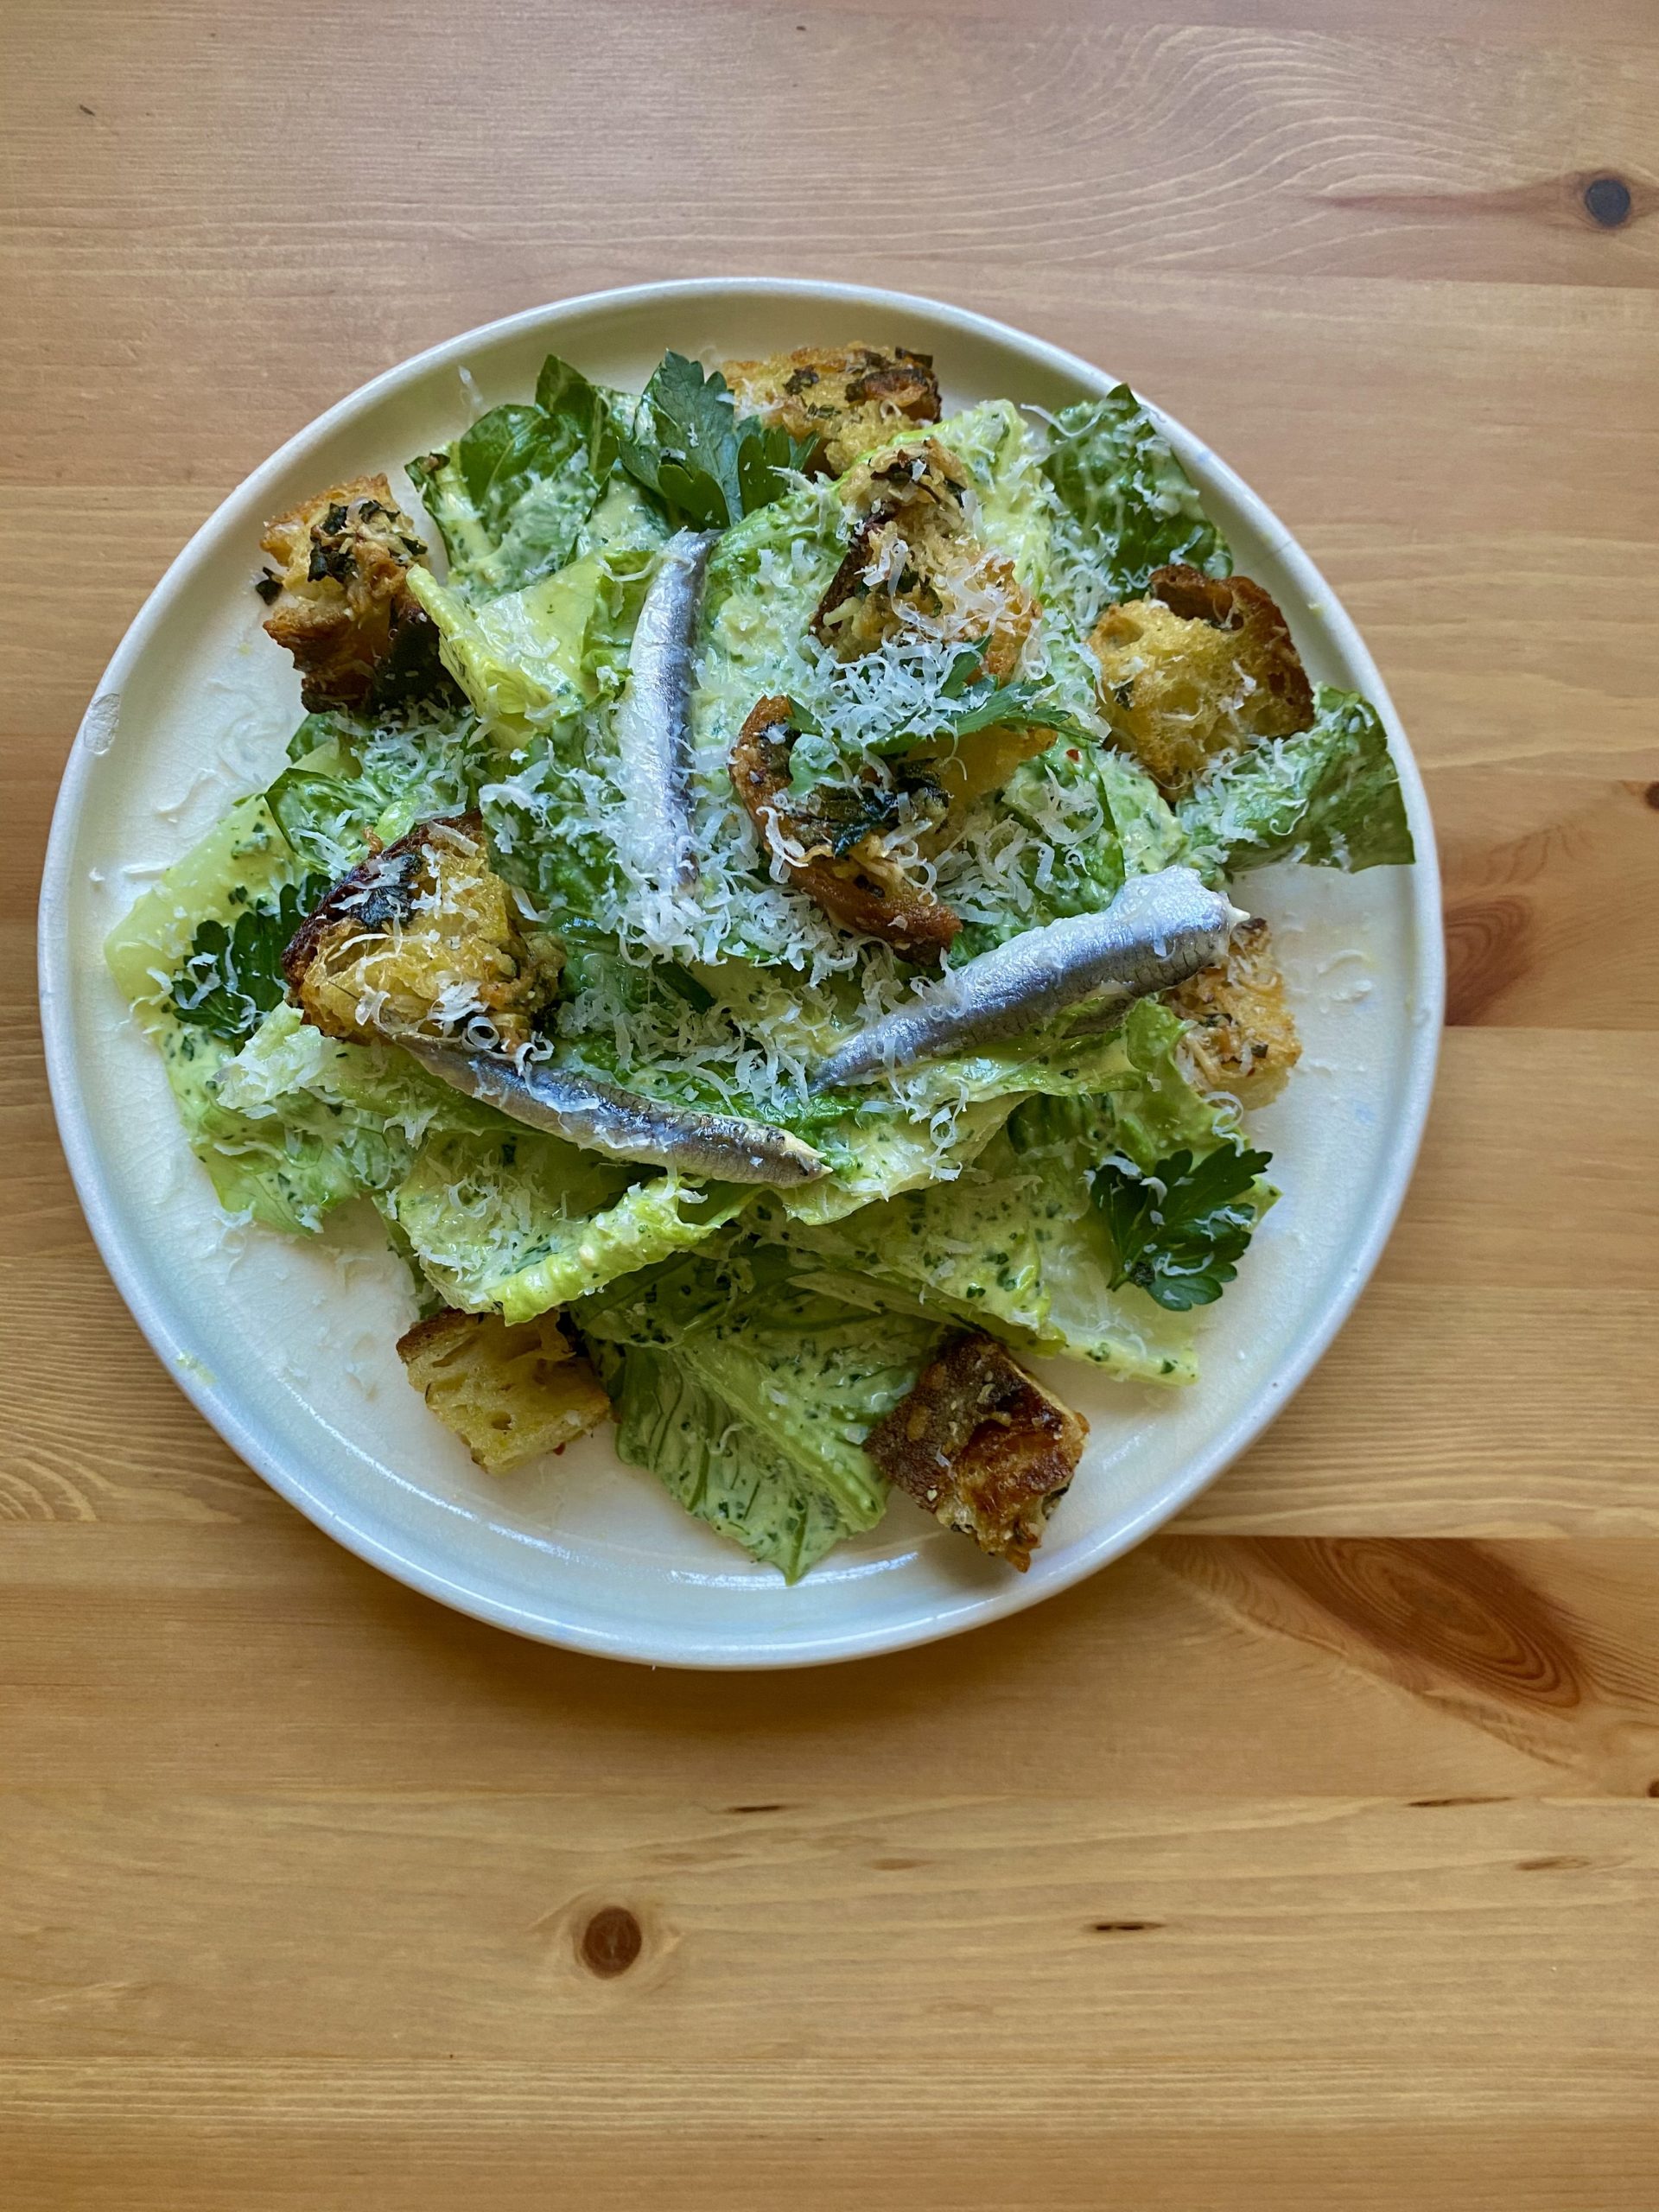 A caesar salad with anchovy and croutons on top.